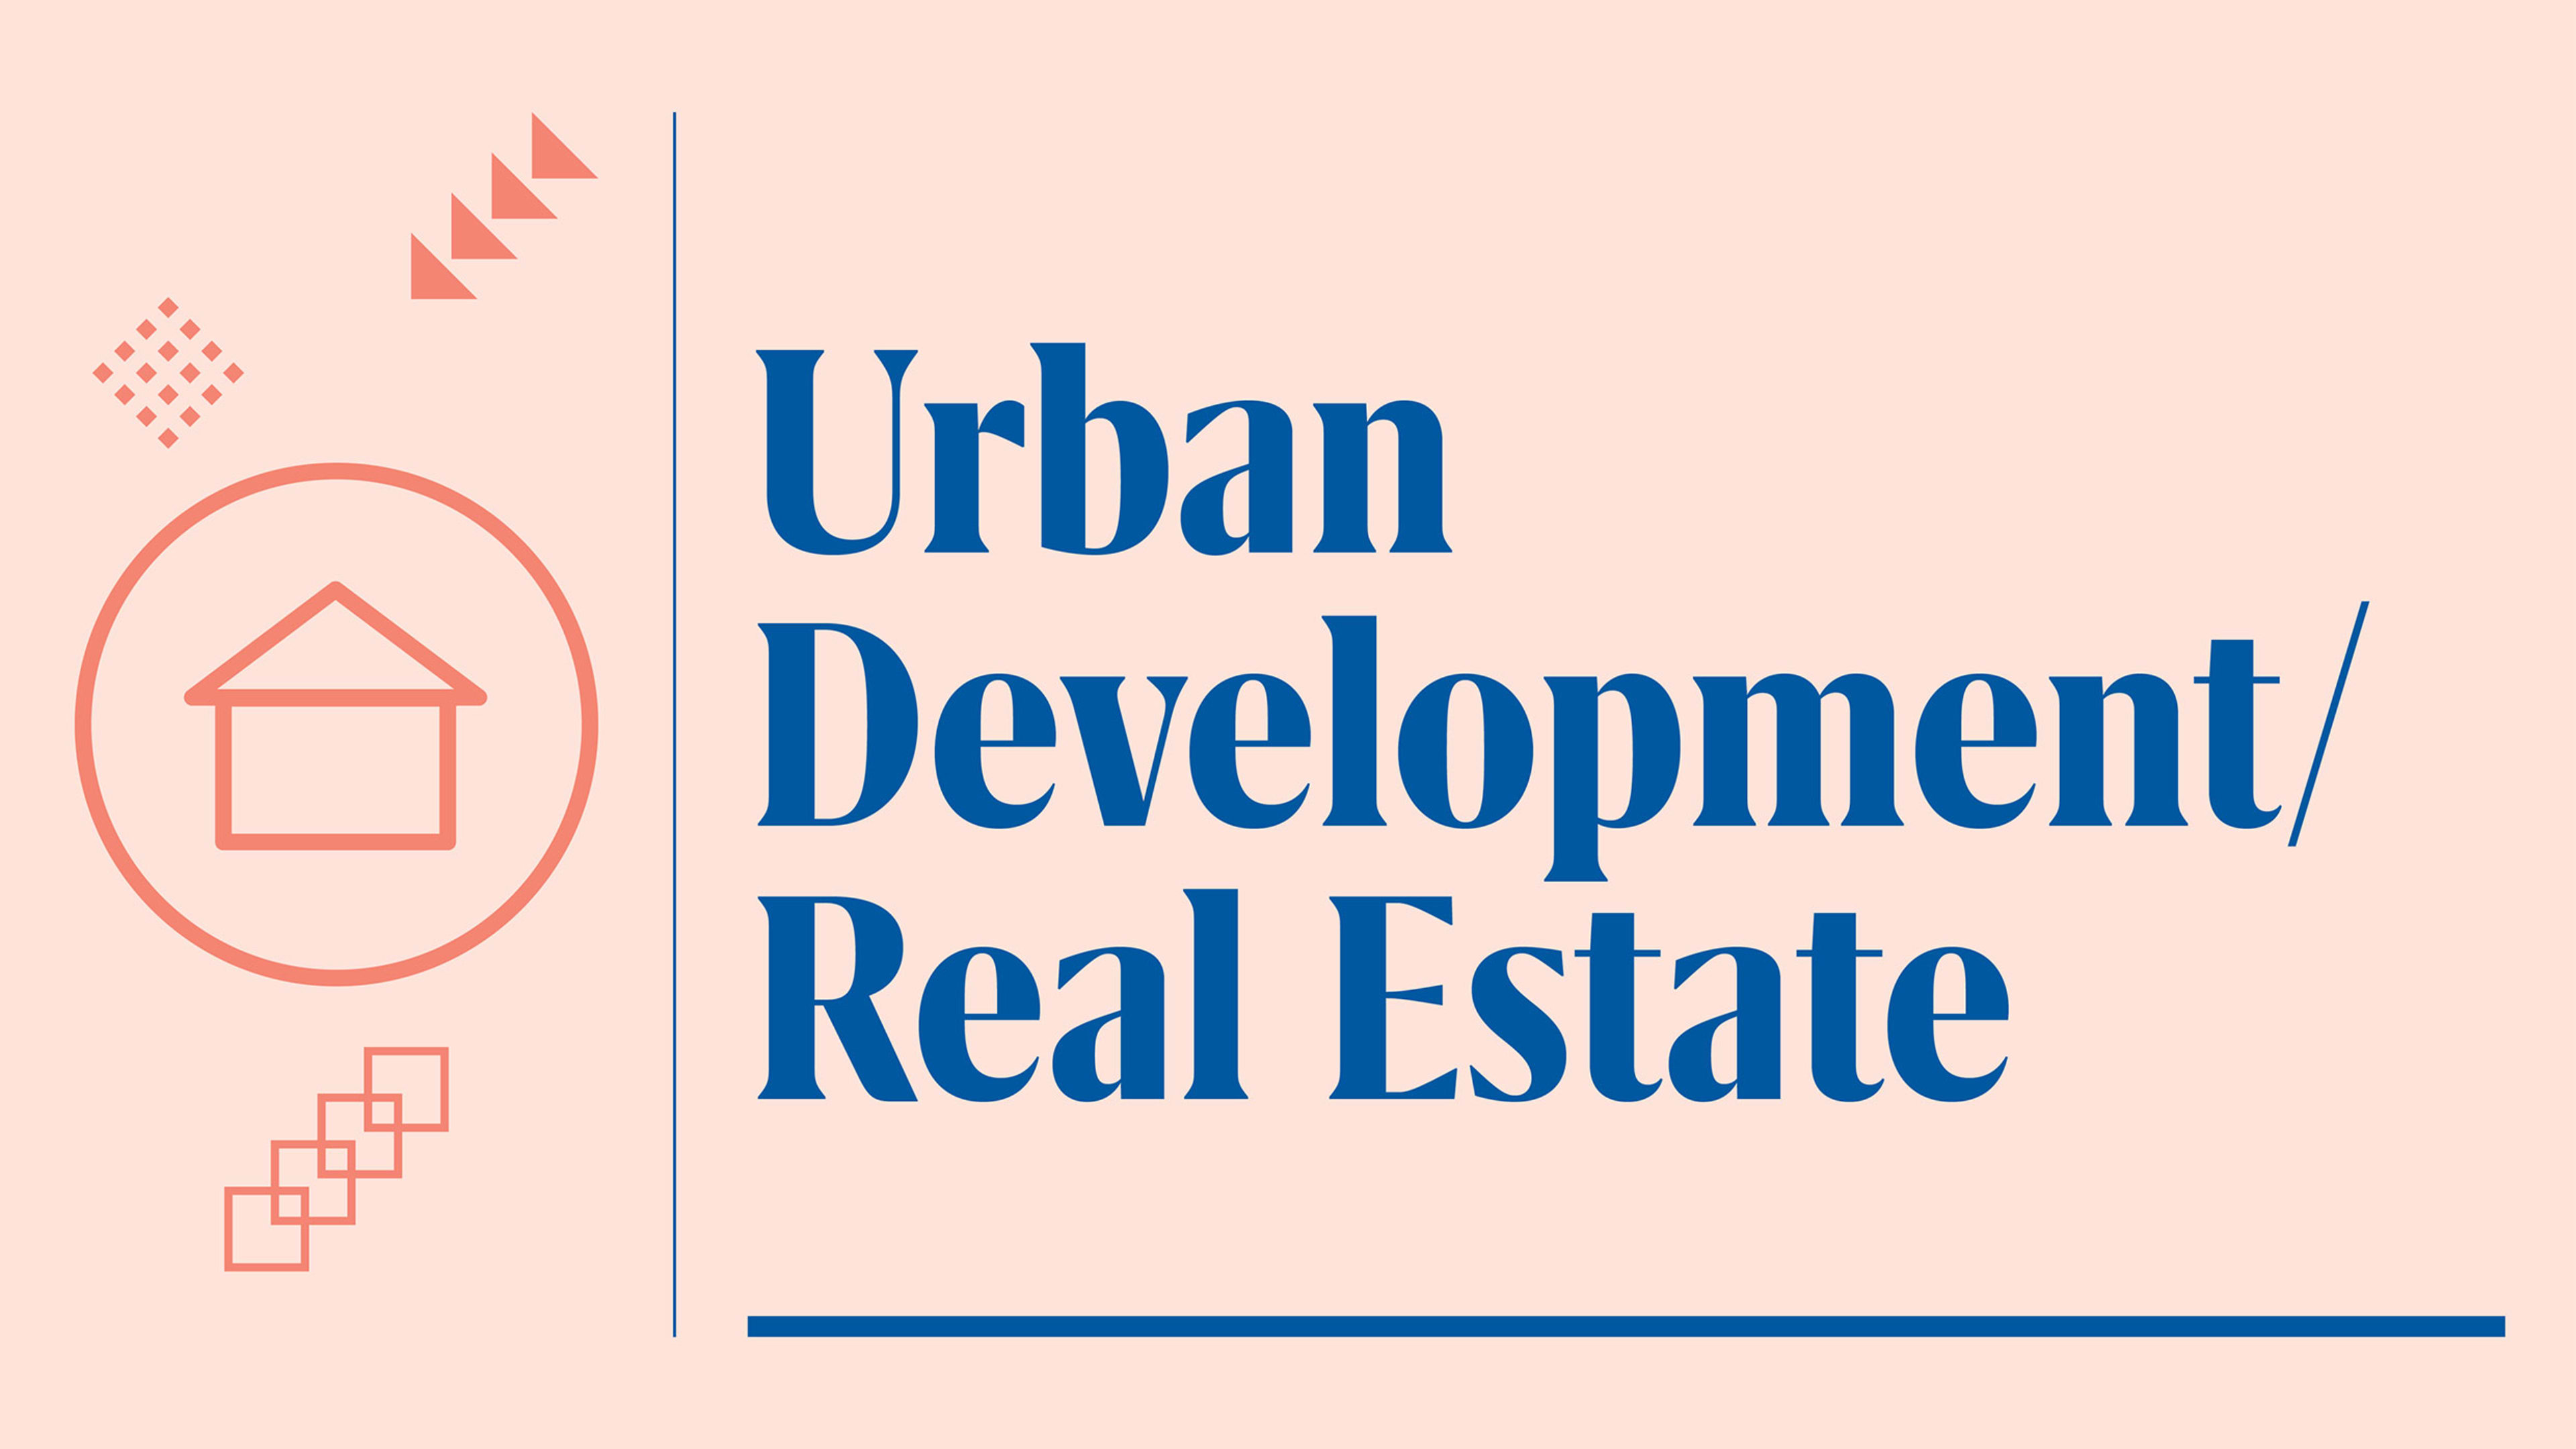 The 10 most innovative urban development and real estate companies of 2020